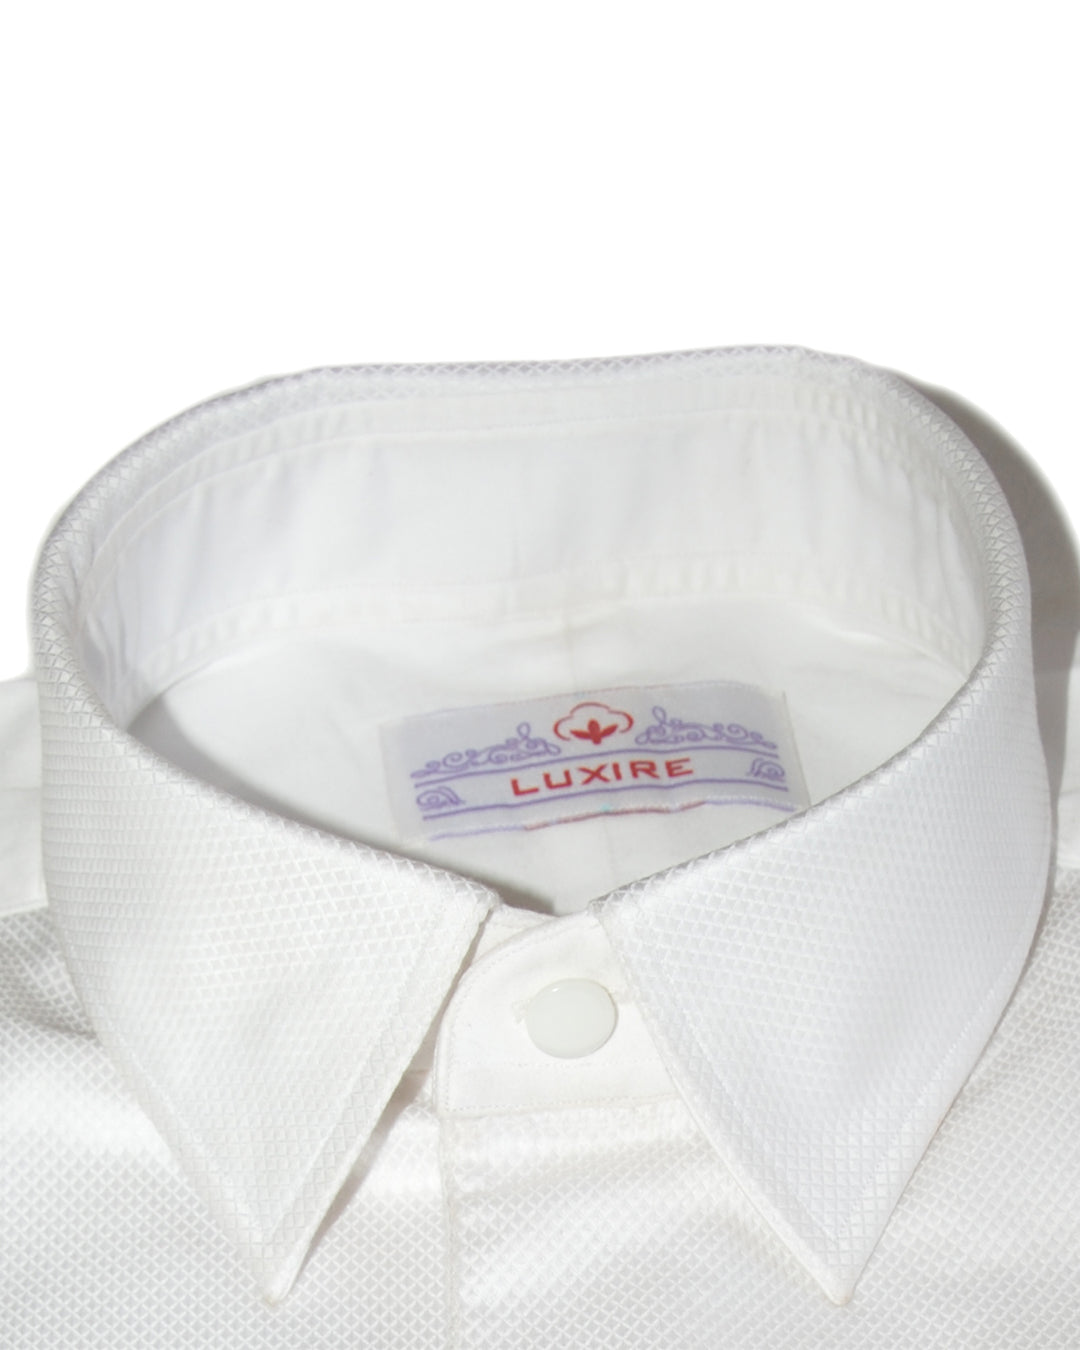 Collar of the mens tuxedo shirt by Luxire called classic 2